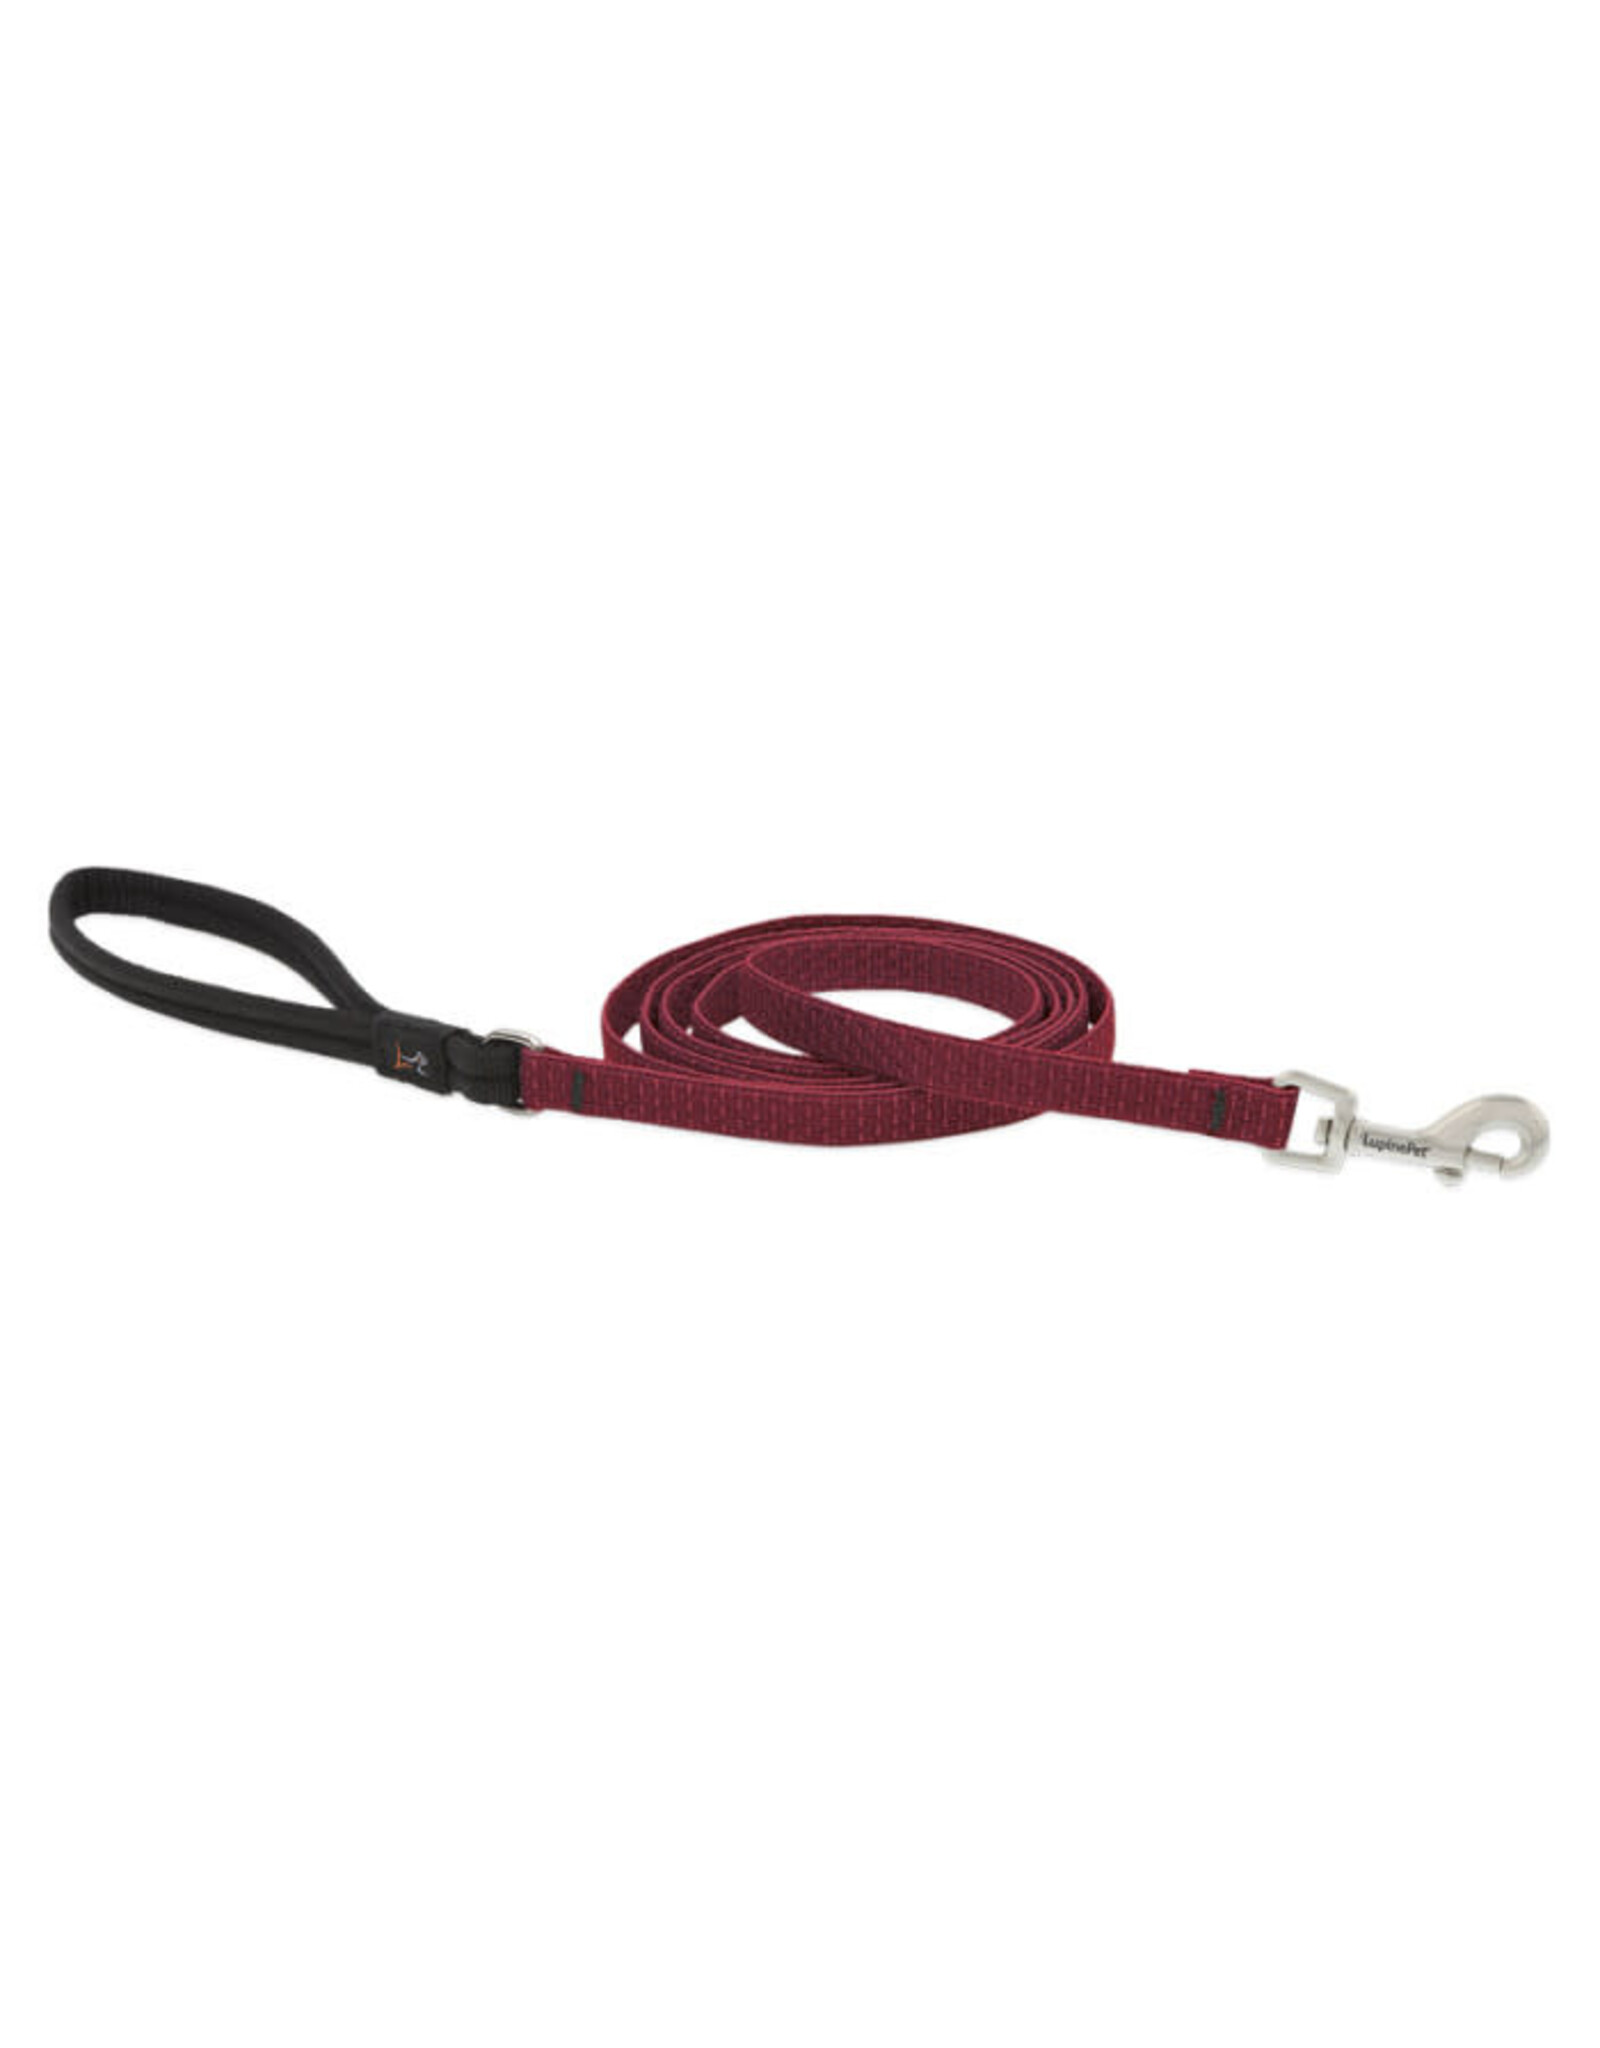 LUPINE LUPINE 1/2IN BERRY LEASH 6FT